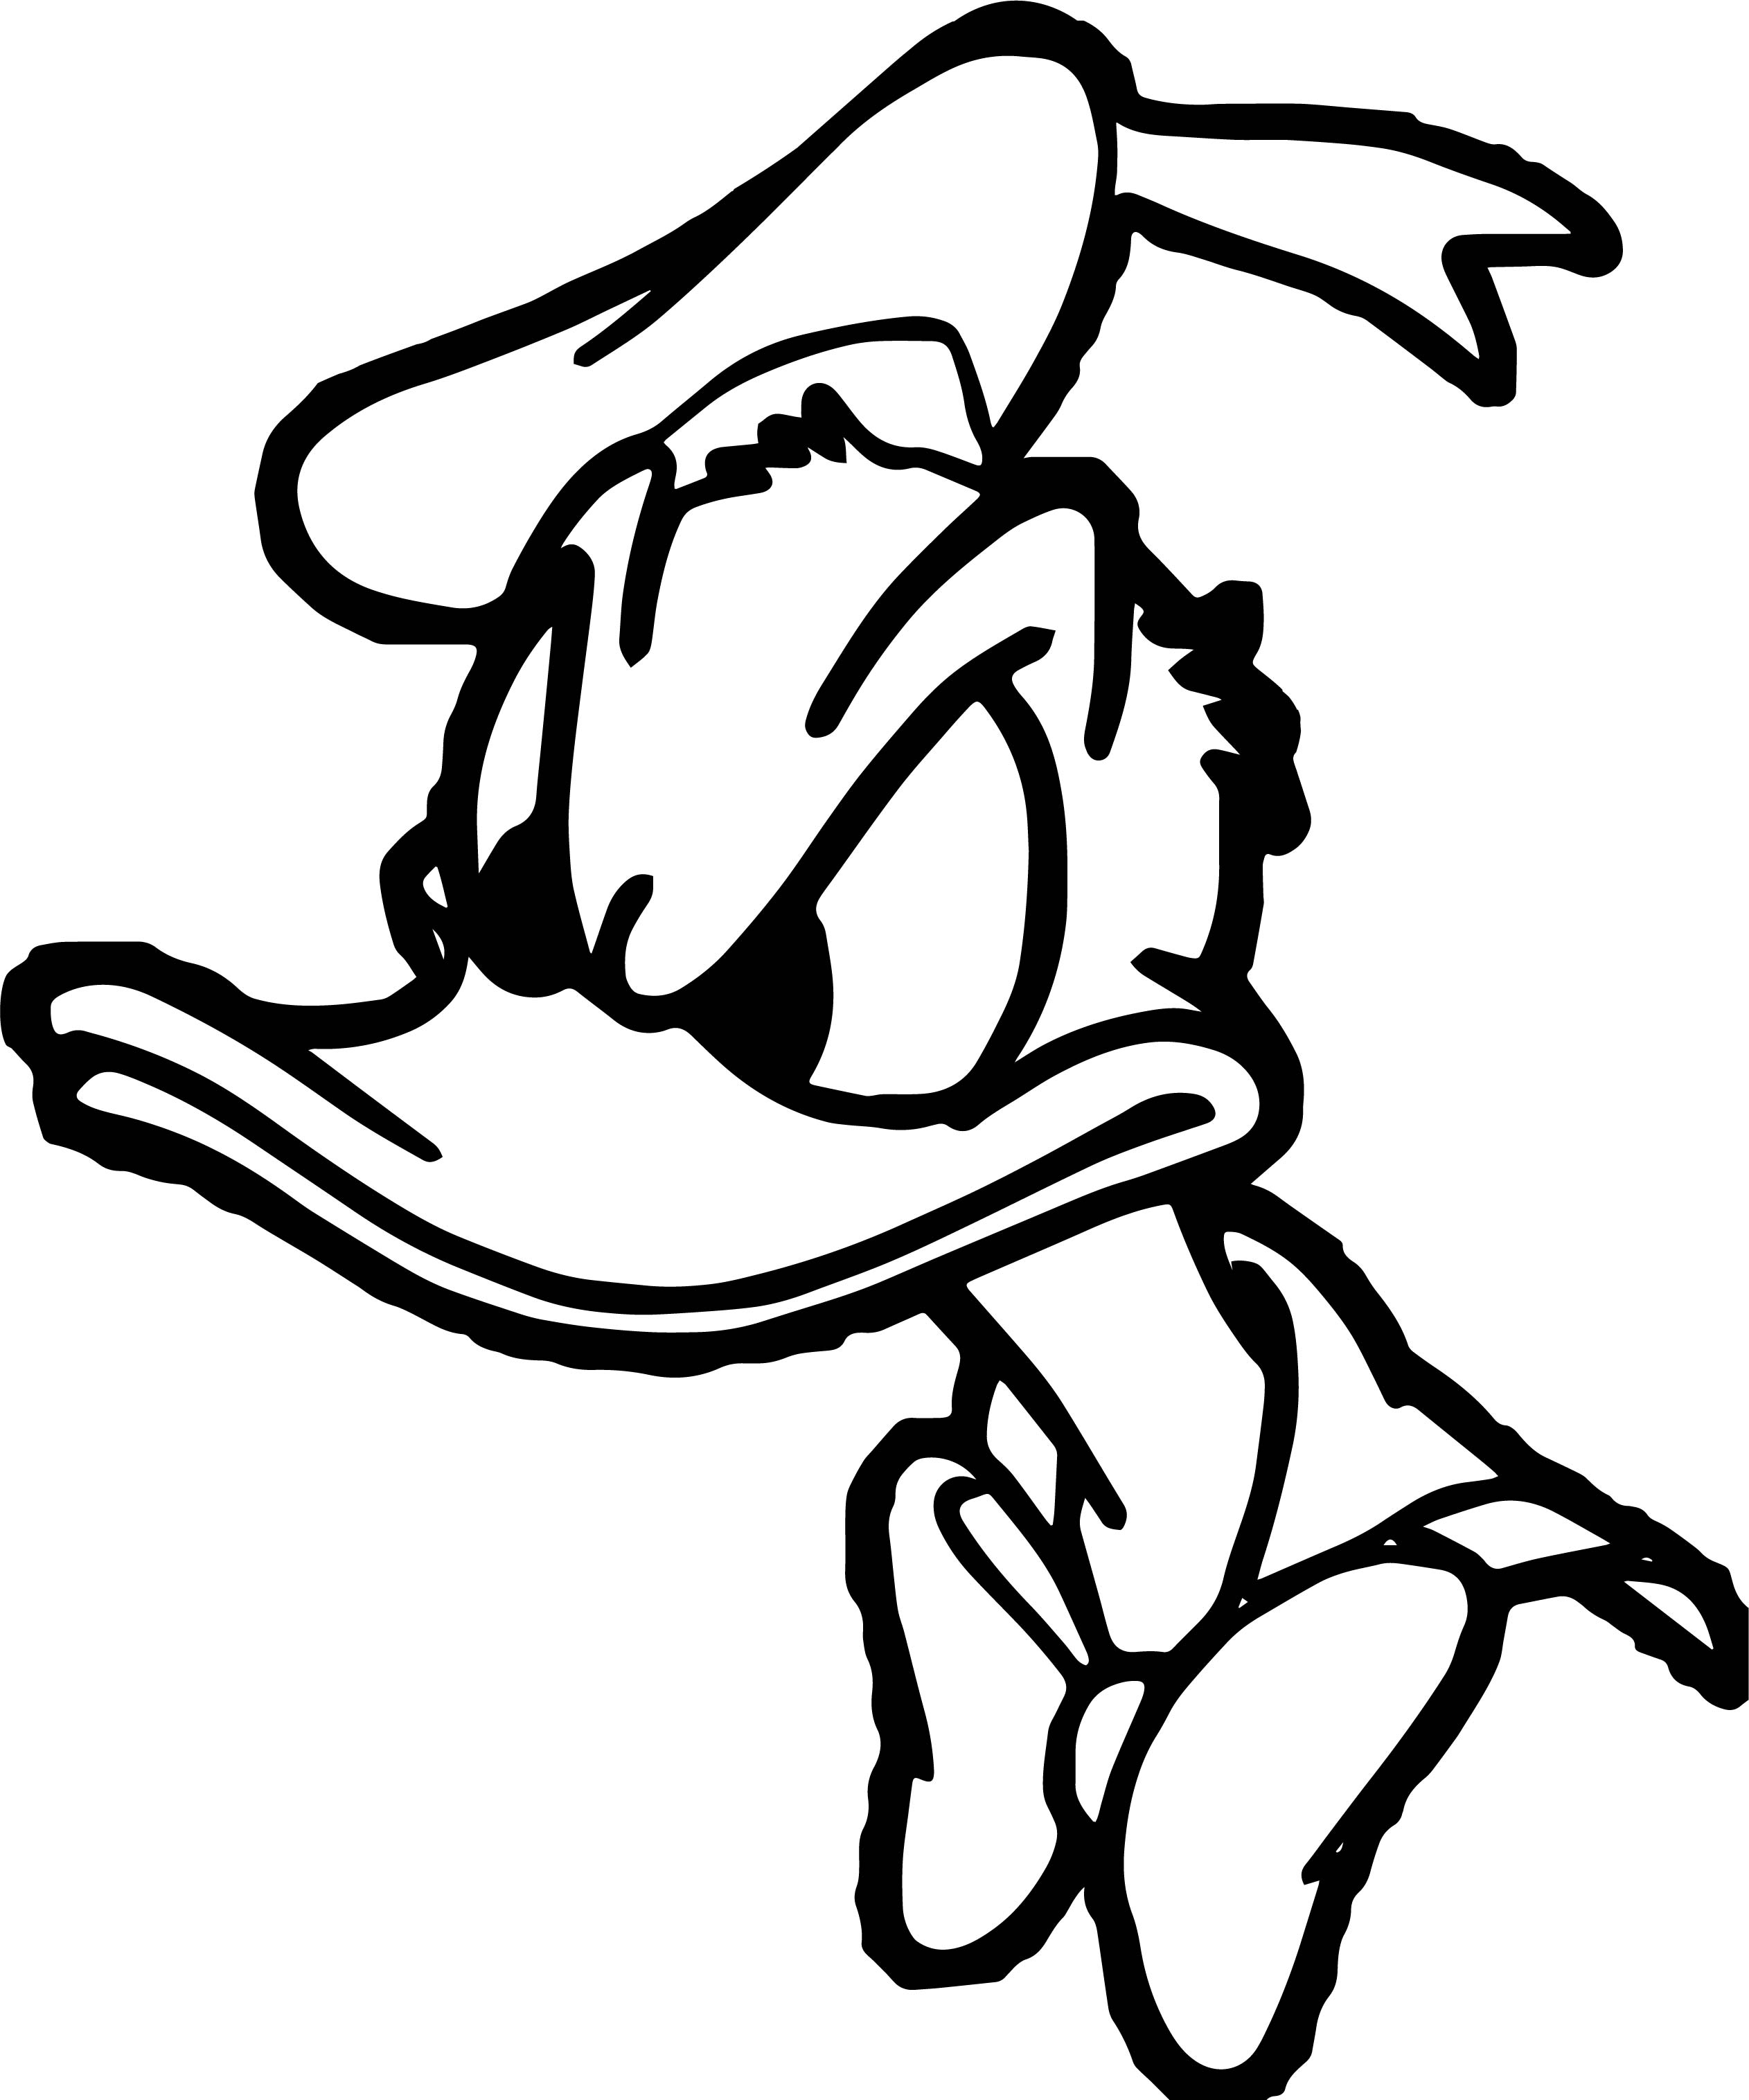 Easy Donald Duck Sketch Drawings for Beginner